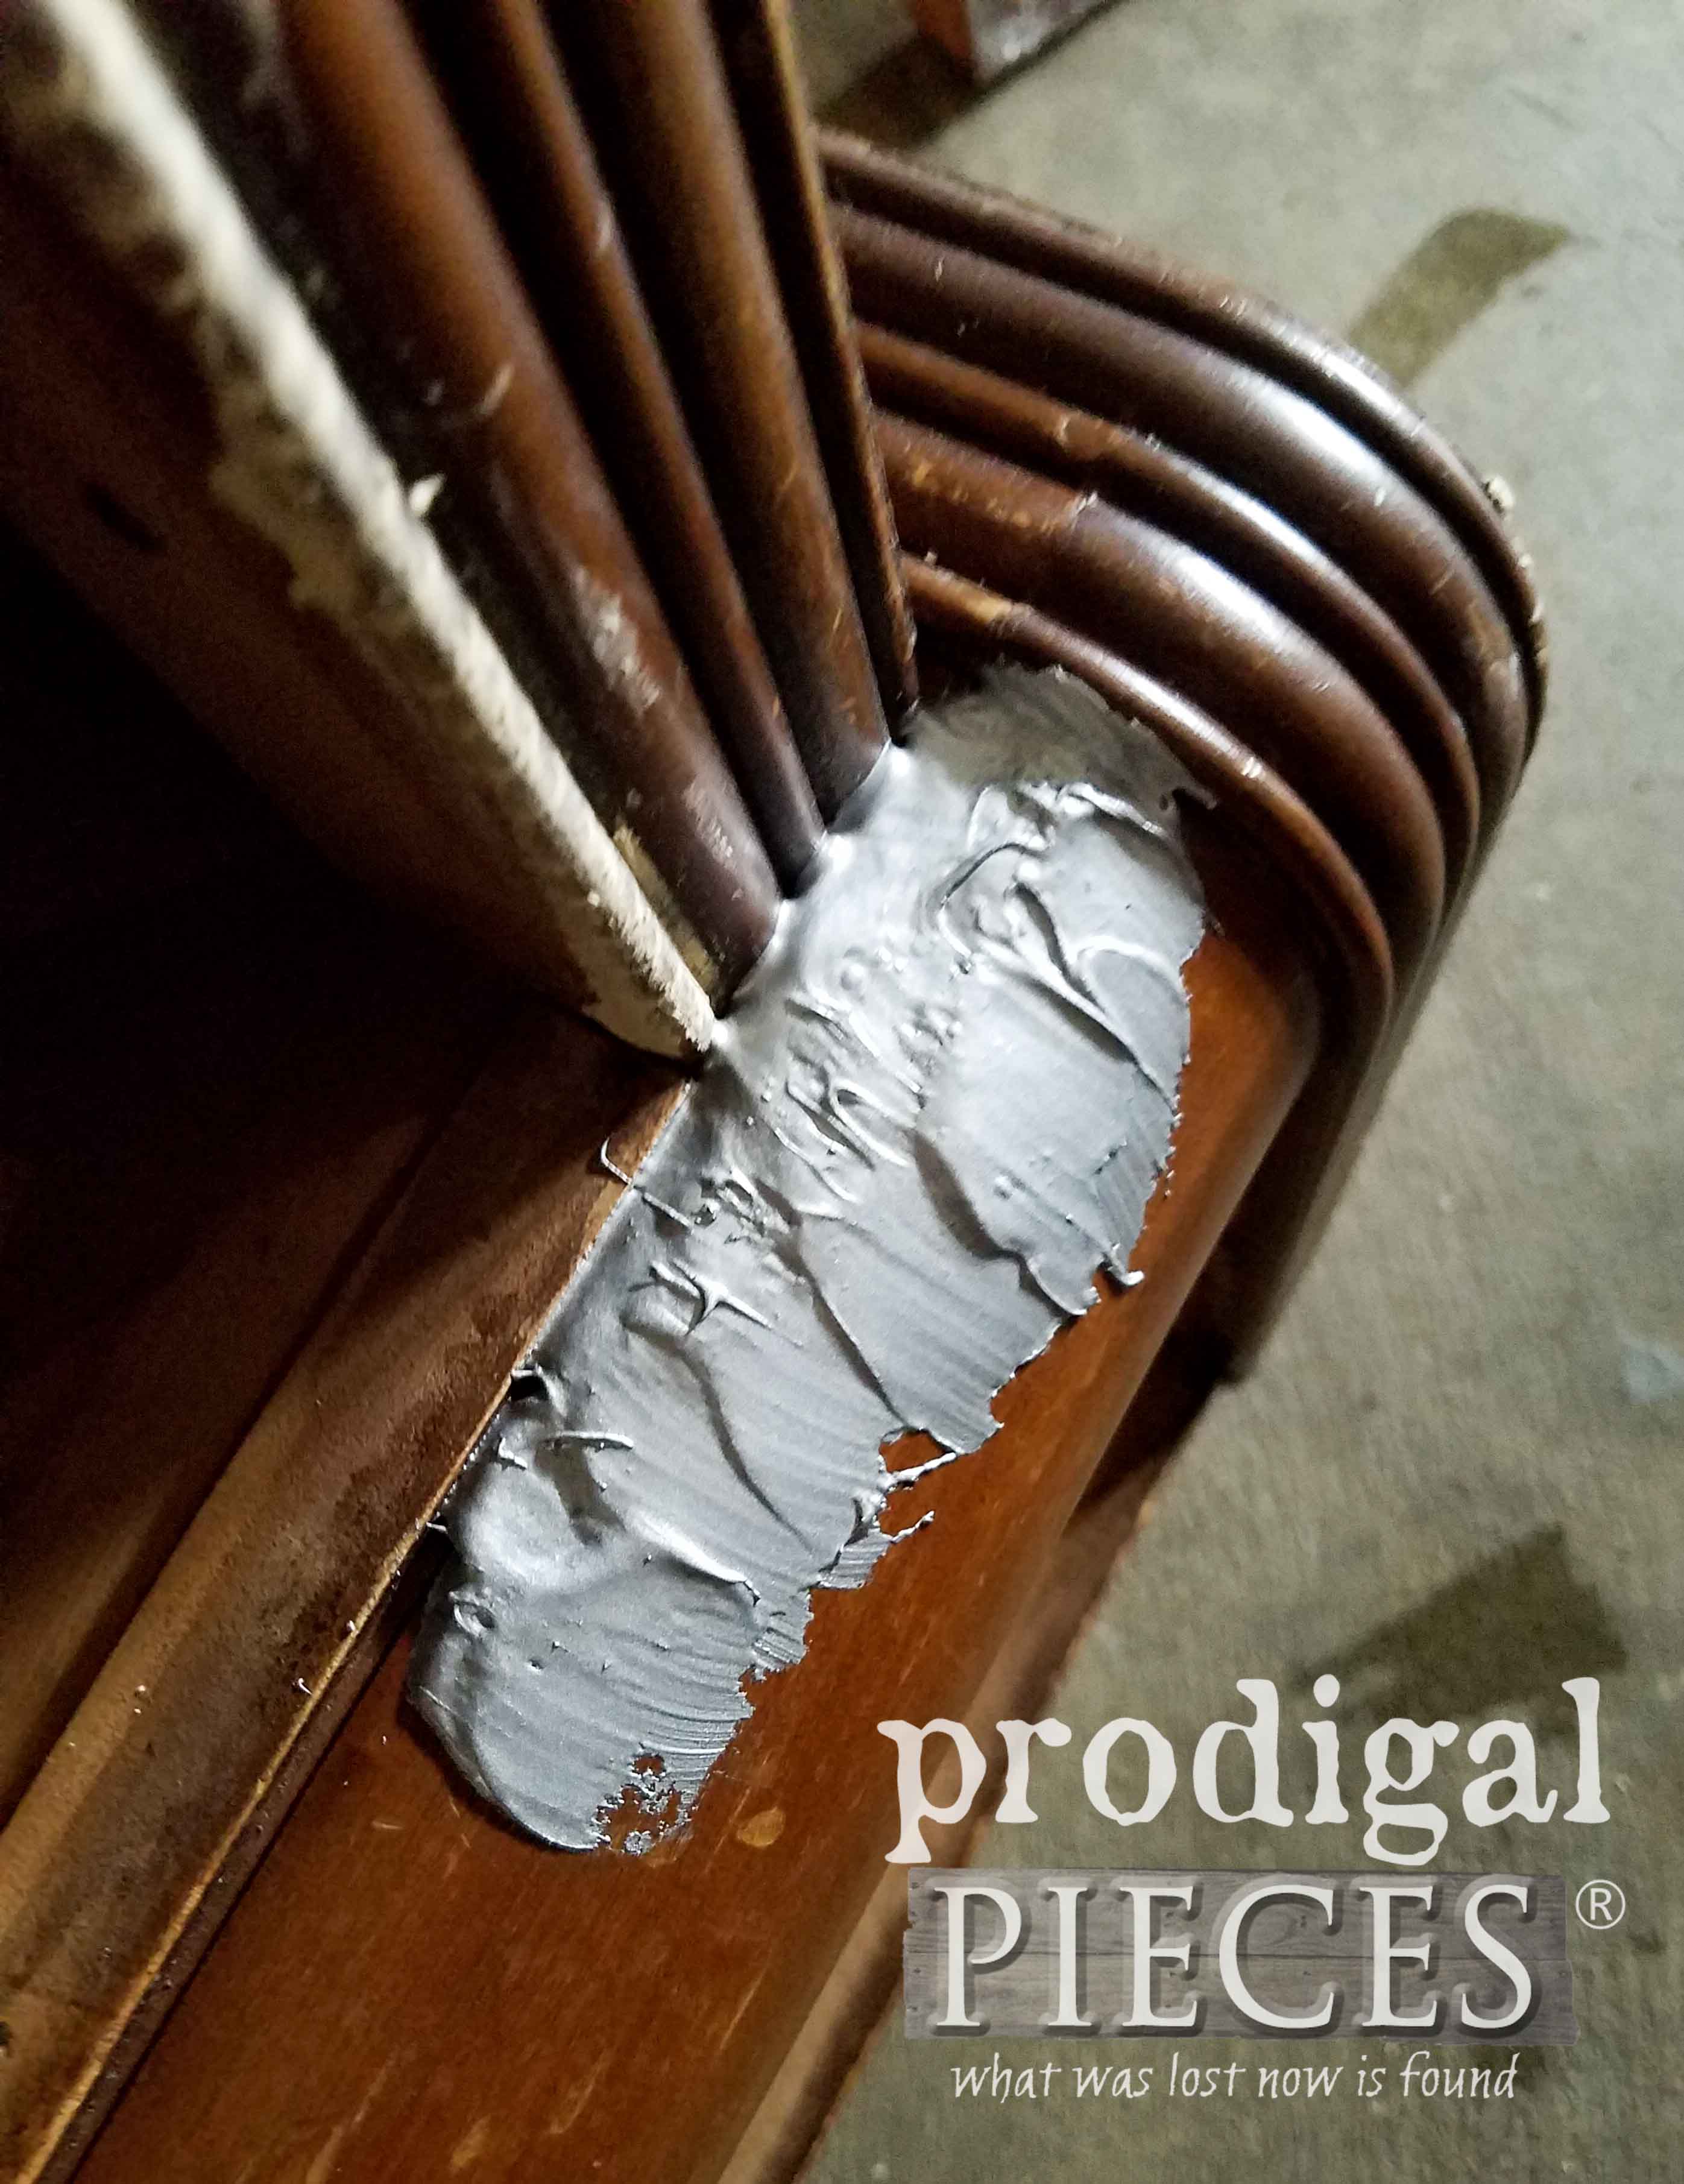 Repaired Heavy Furniture Damage with Metal Bondo by Prodigal Pieces | prodigalpieces.com